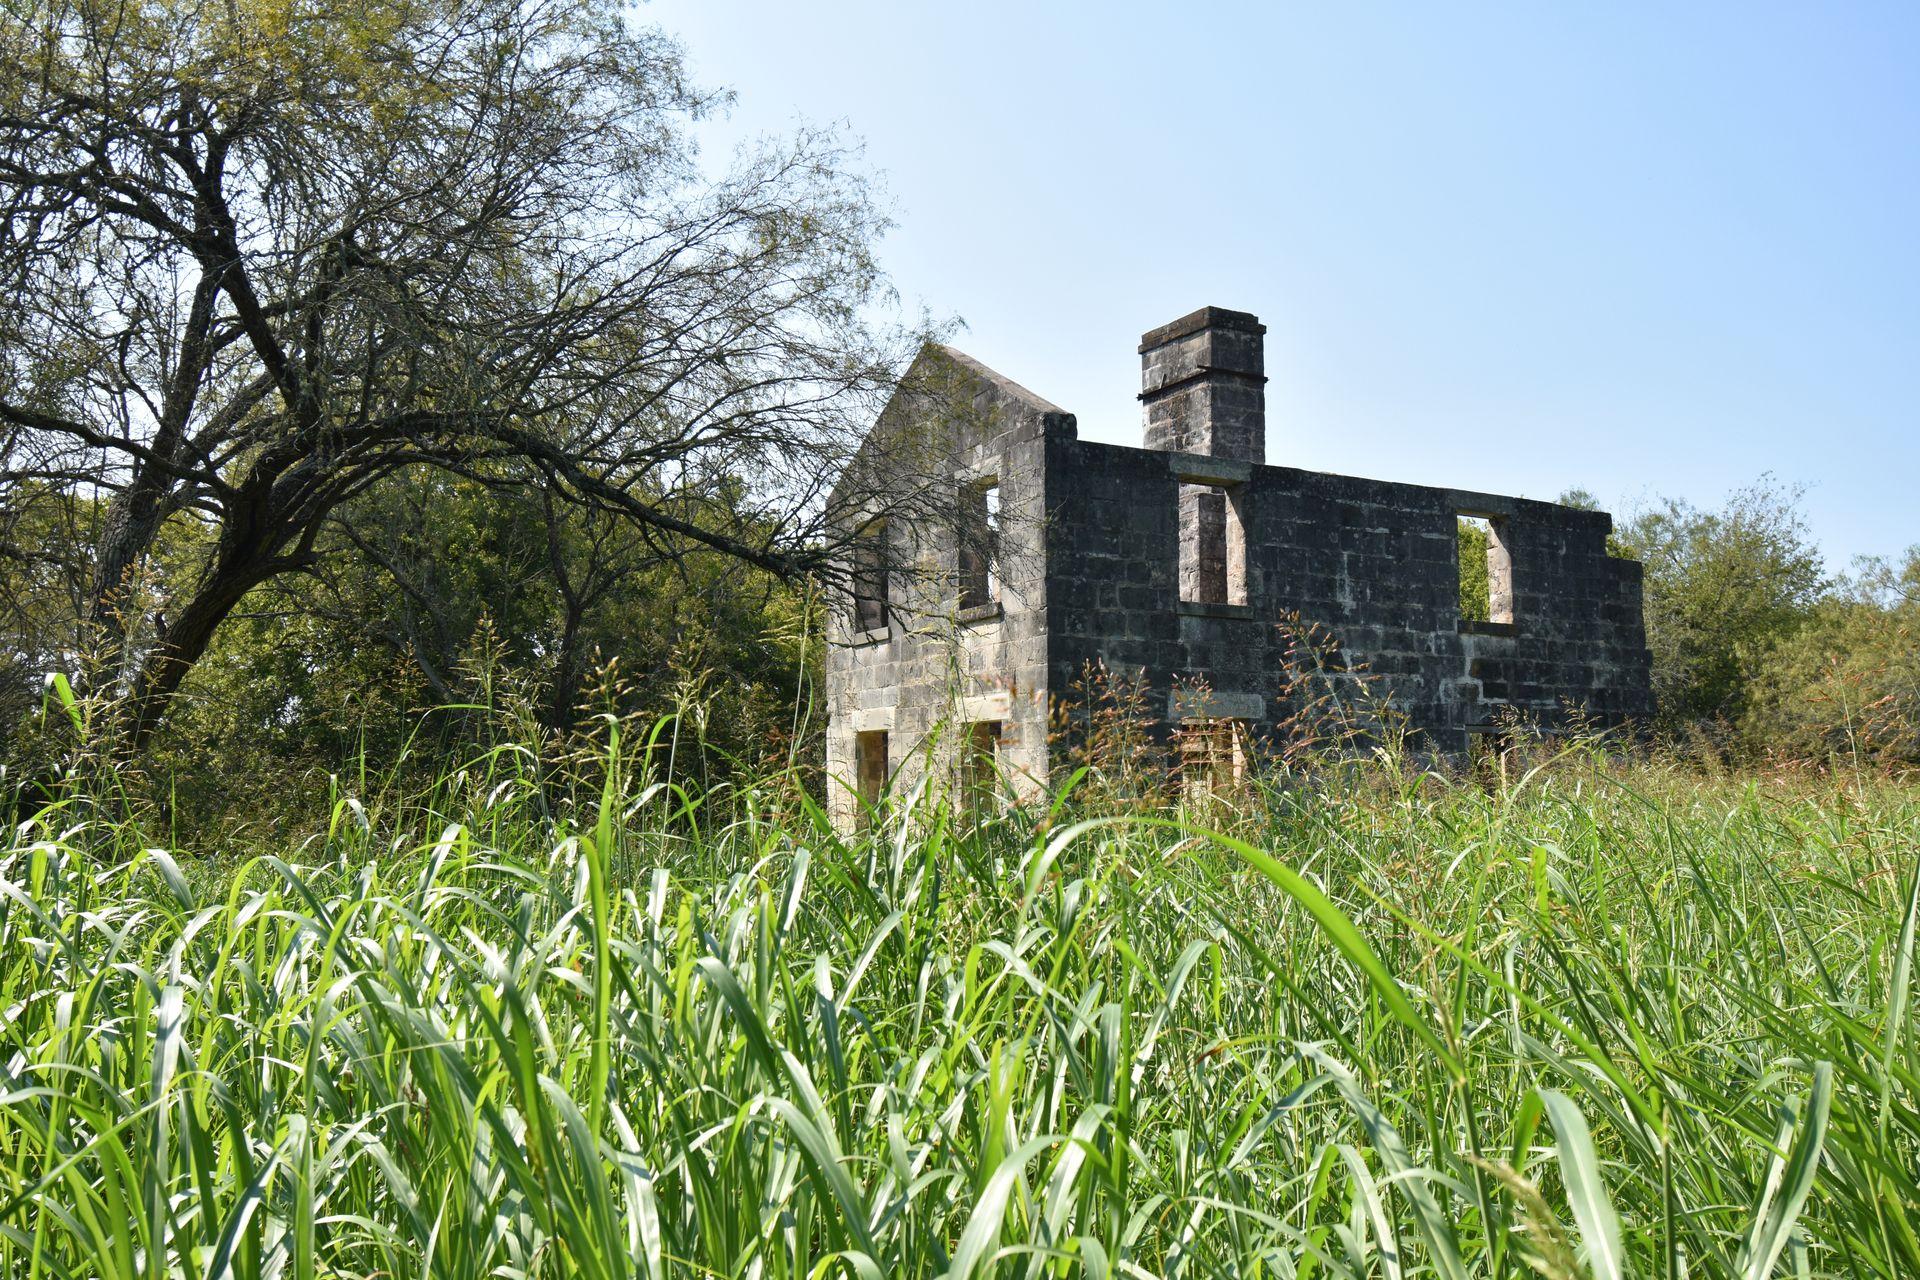 The ruins of a house surrounded by tall green grass